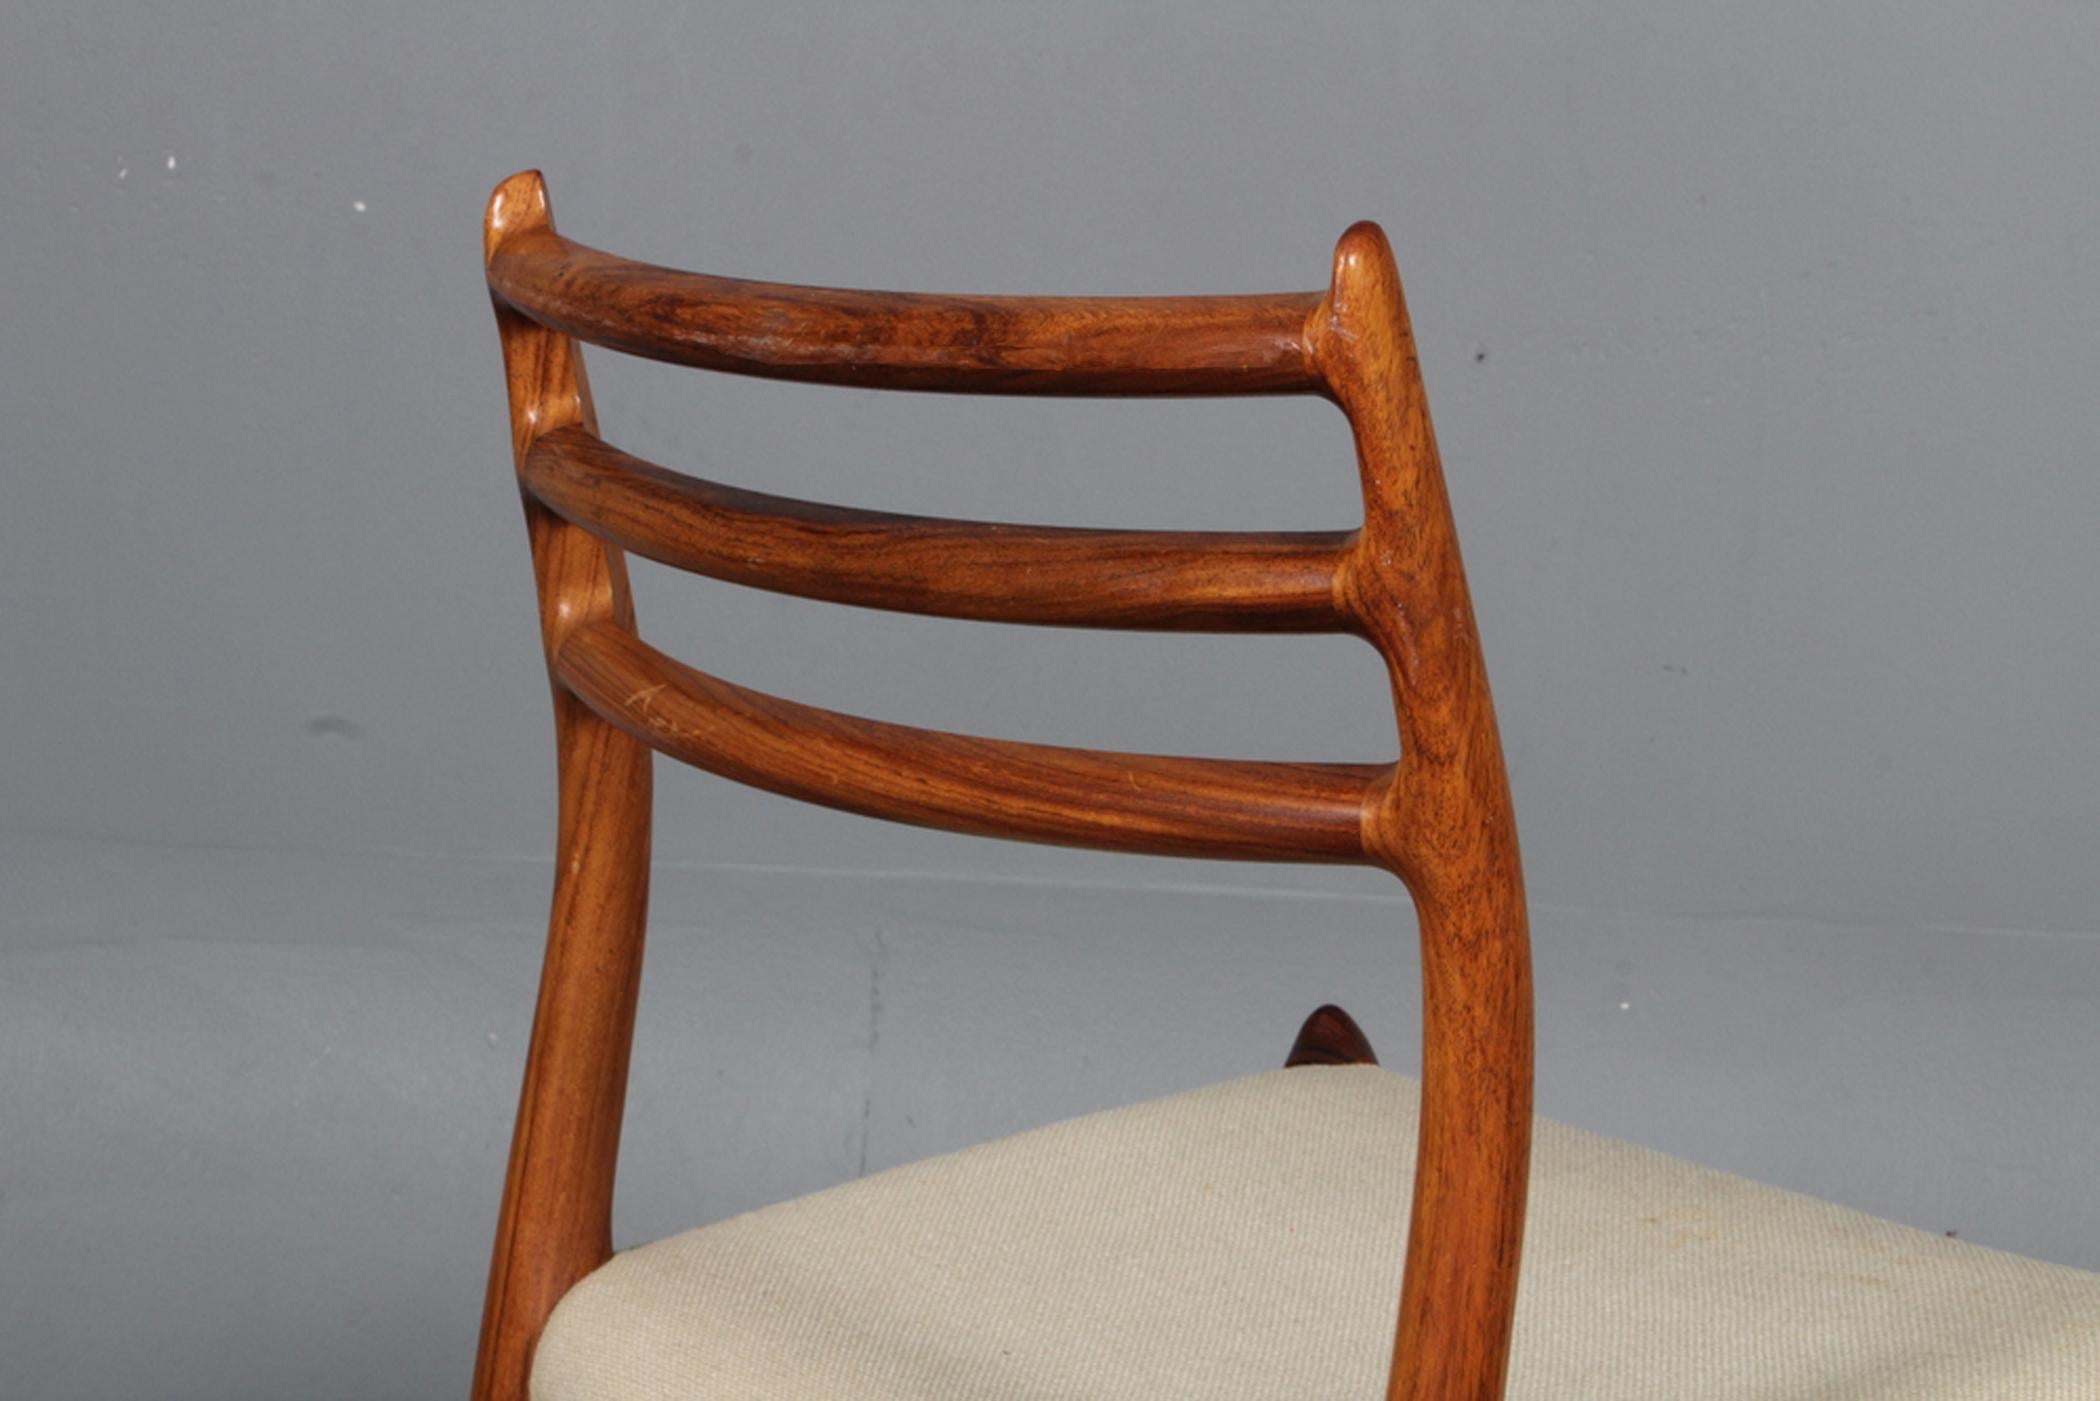 Dining chairs made of solid hardwood, designed in the 1950s by Niels Otto Møller and produced by J. L. Møller Møbelfabrik, model number 78. Original condition. Delivery time about 1-2 weeks. New upholstery on request possible.

